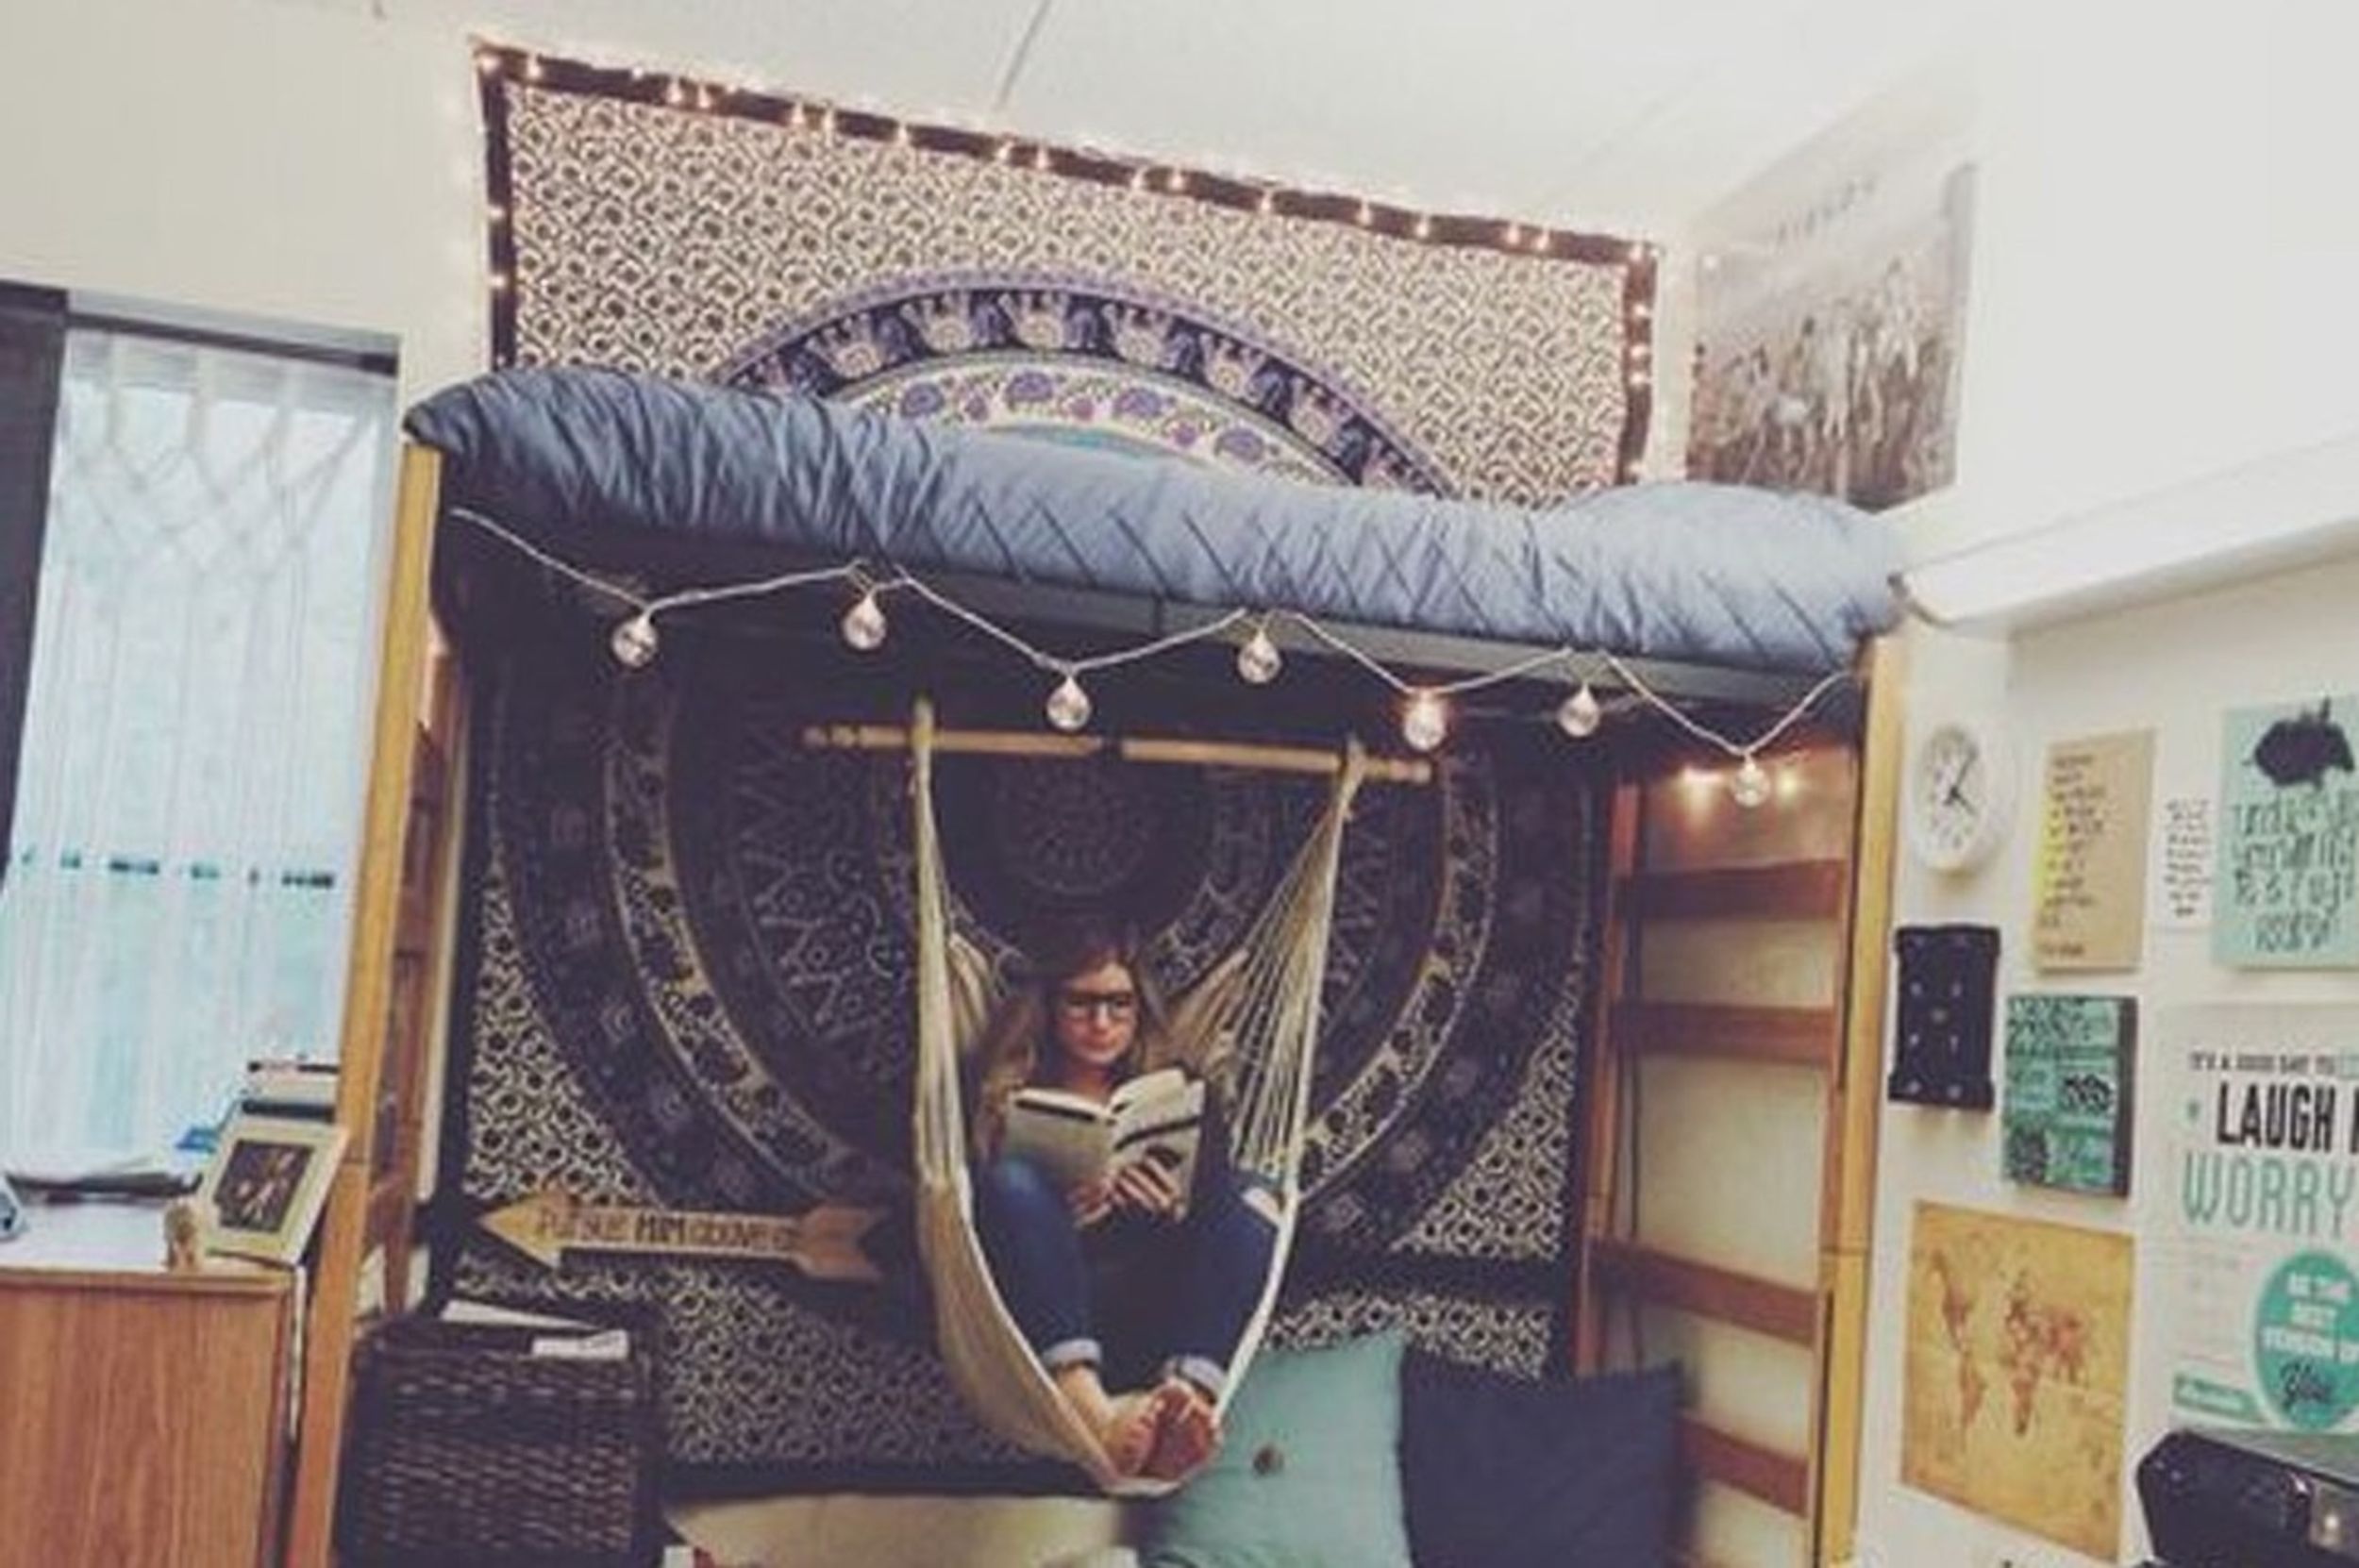 10 Things I Won't Miss About Living On Campus